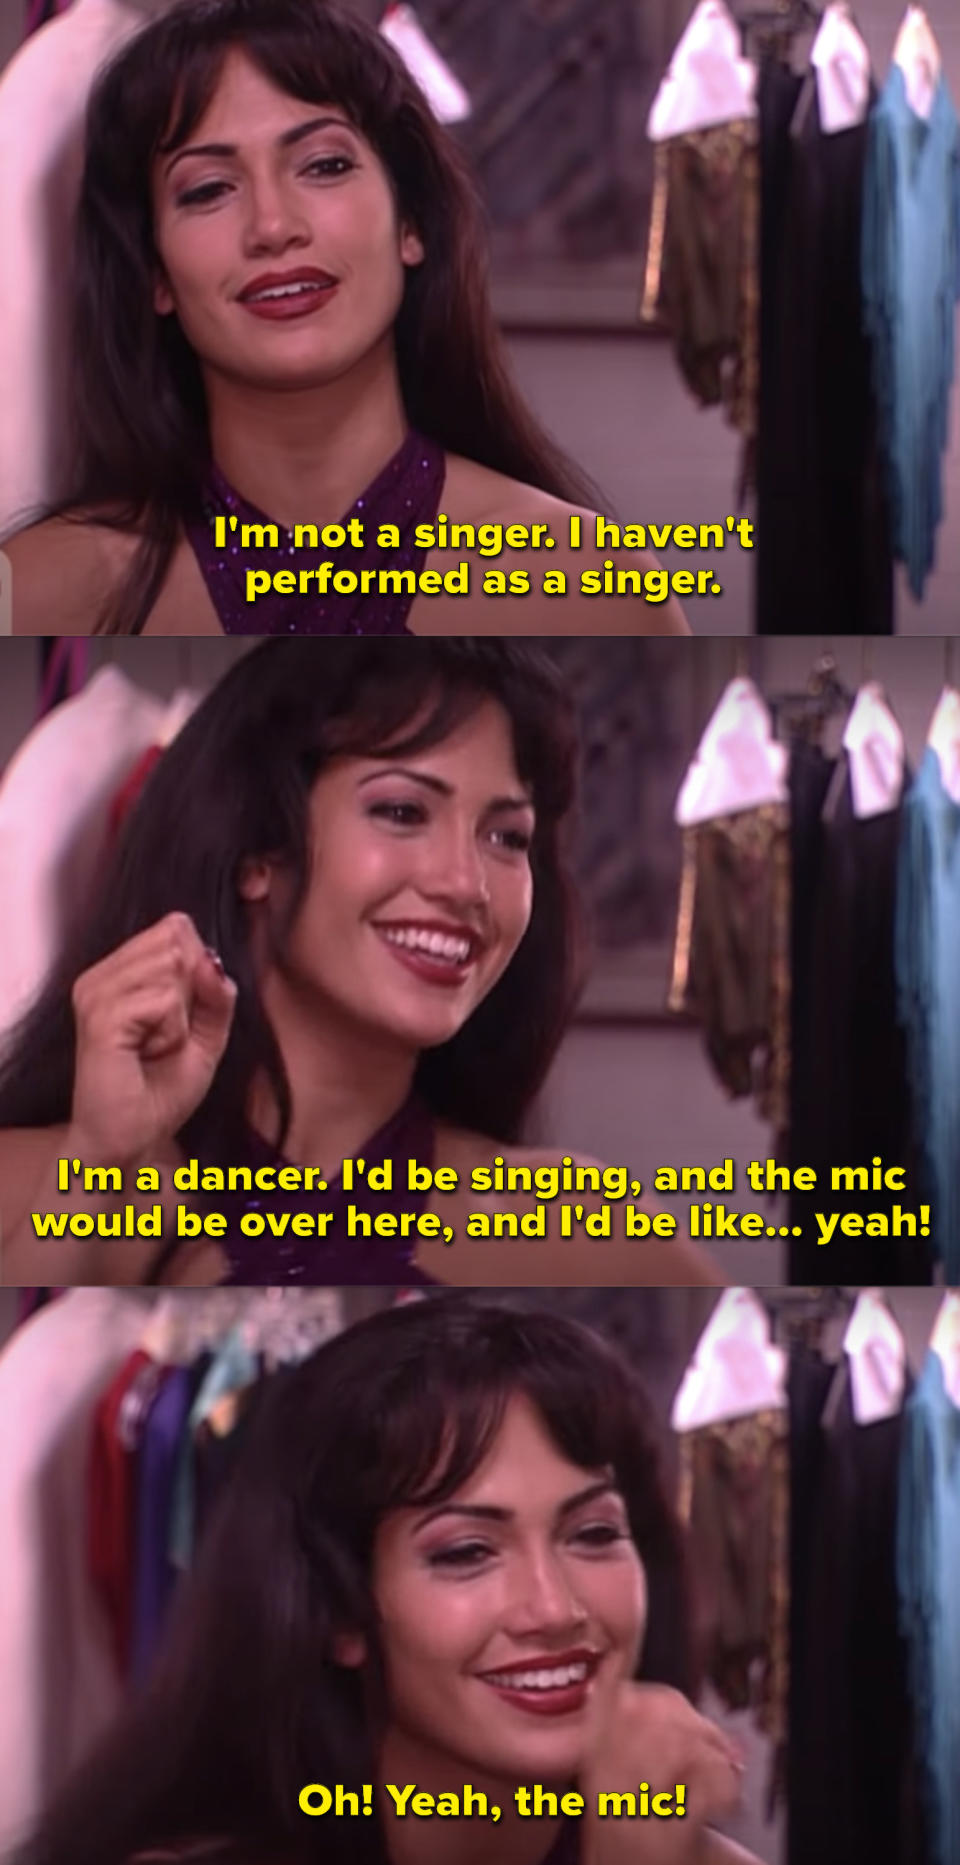 Jennifer Lopez in a behind-the-scenes interview while filming "Selena"